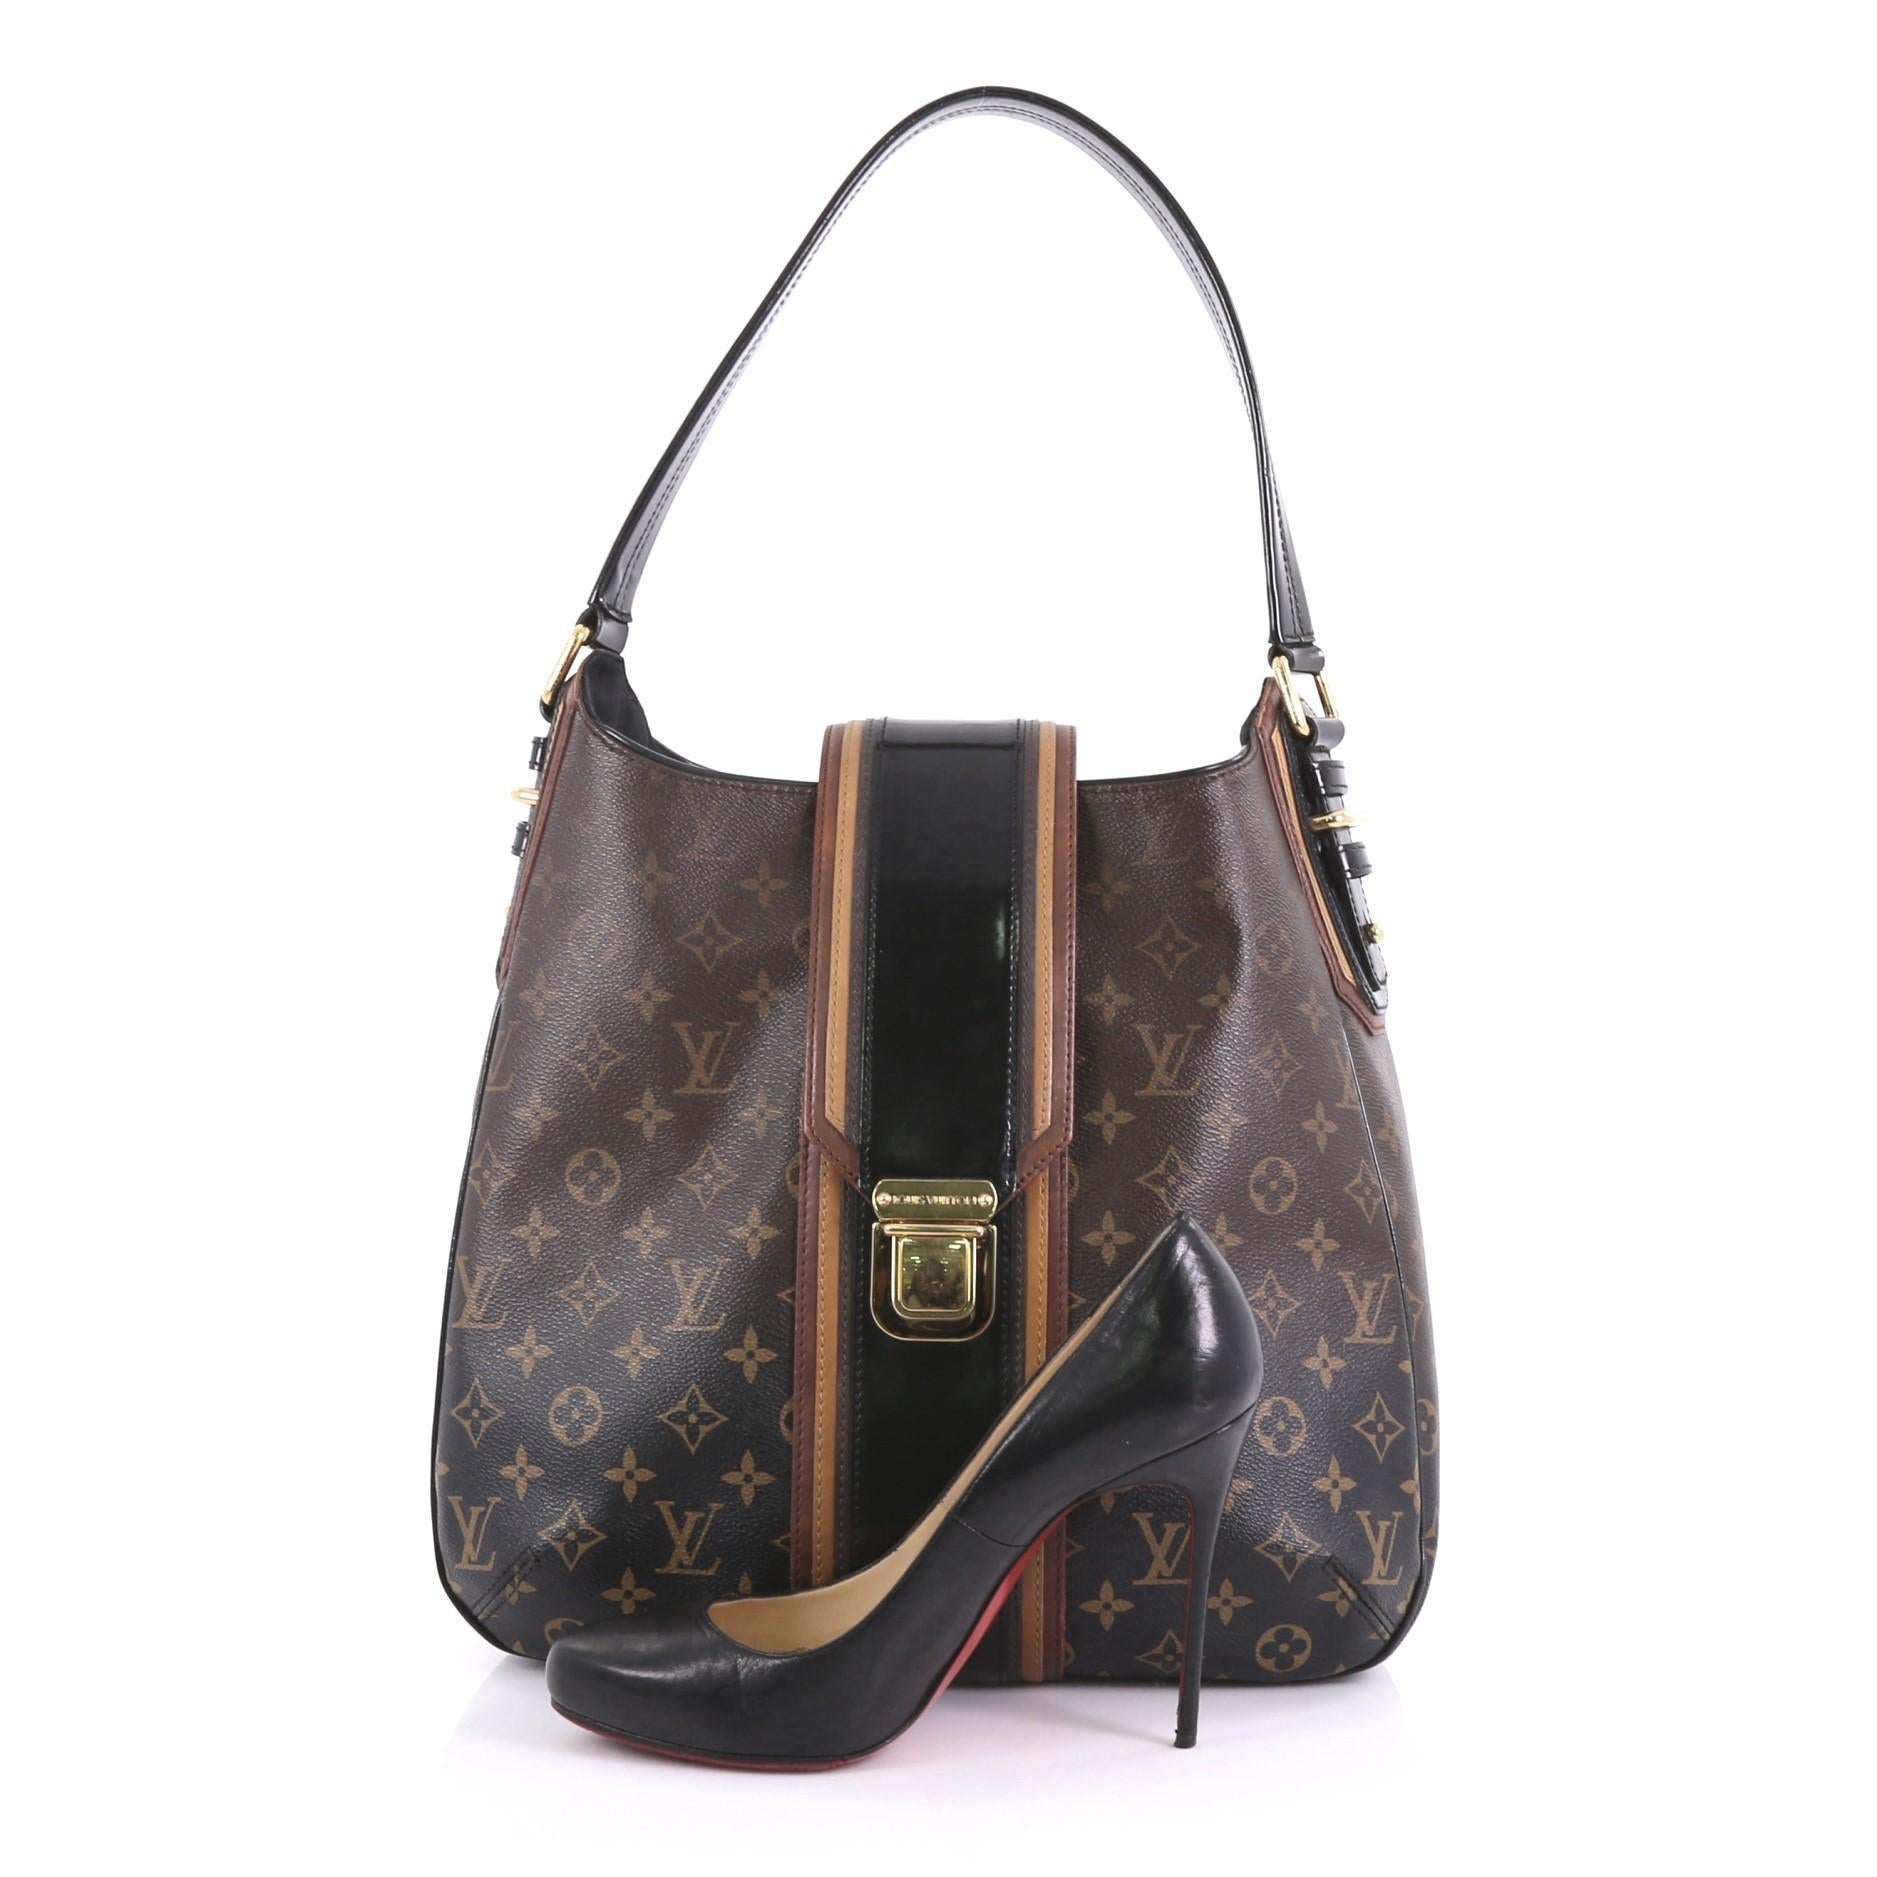 This Louis Vuitton Musette Handbag Limited Edition Monogram Mirage, crafted in brown monogram coated canvas, features patent leather handle and trim, protective base studs, and gold-tone hardware. Its push-lock closure opens to a black microfiber